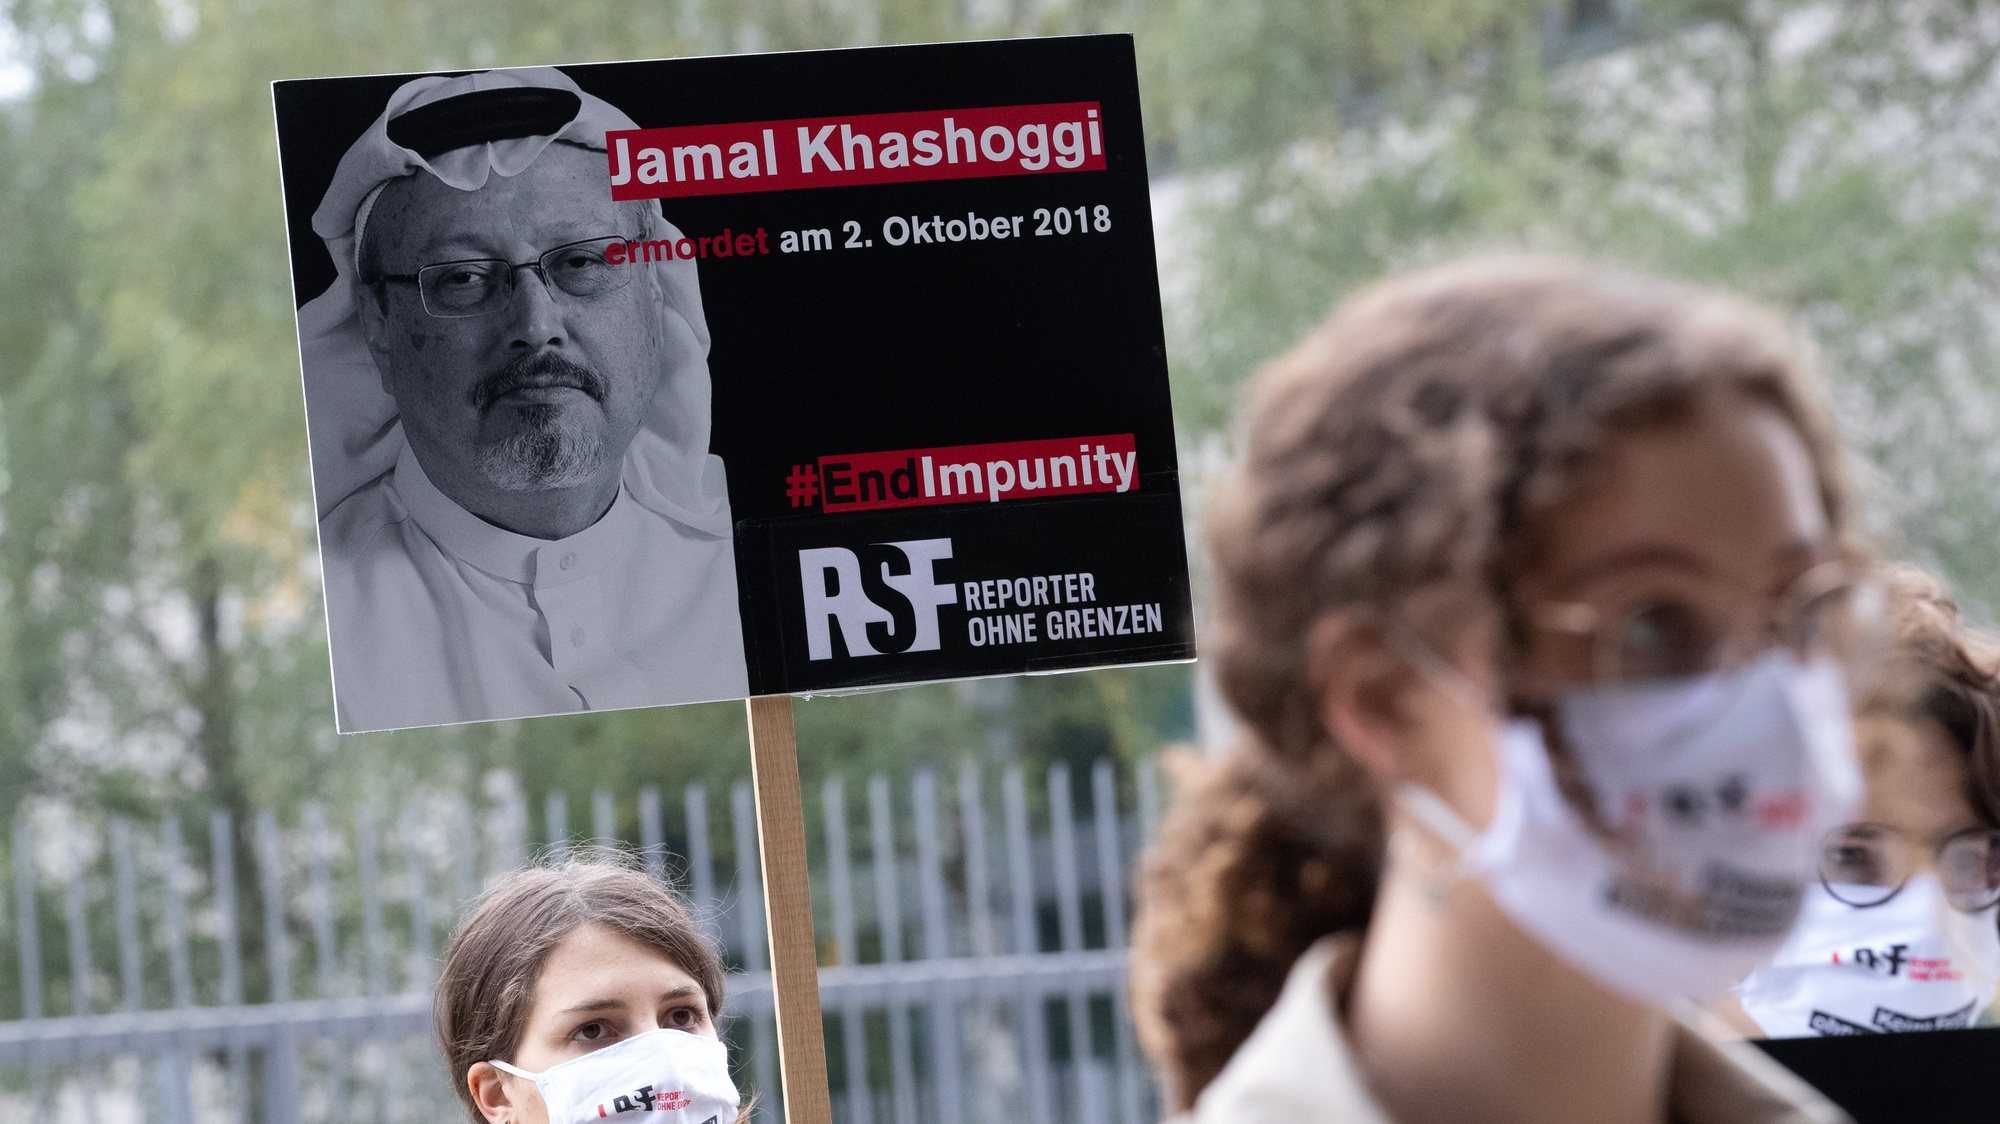 epa08715161 People holding placards reading &#039;Jamal Khashoggi assasinated 2 October 2018, #EndImpunity&#039; participate in a vigil for the second anniversary of the murdered Saudi journalist Jamal Khashoggi in front of the Saudi-Arabian embassy in Berlin, Germany, 02 October 2020. Washington Post columnist Jamal Khashoggi was killed while visiting the Saudi consulate in Istanbul, Turkey on 02 October 2018 to do a routine paperwork. Three of a total of 11 suspects were given jail sentences of 24 years in total.  EPA/HAYOUNG JEON